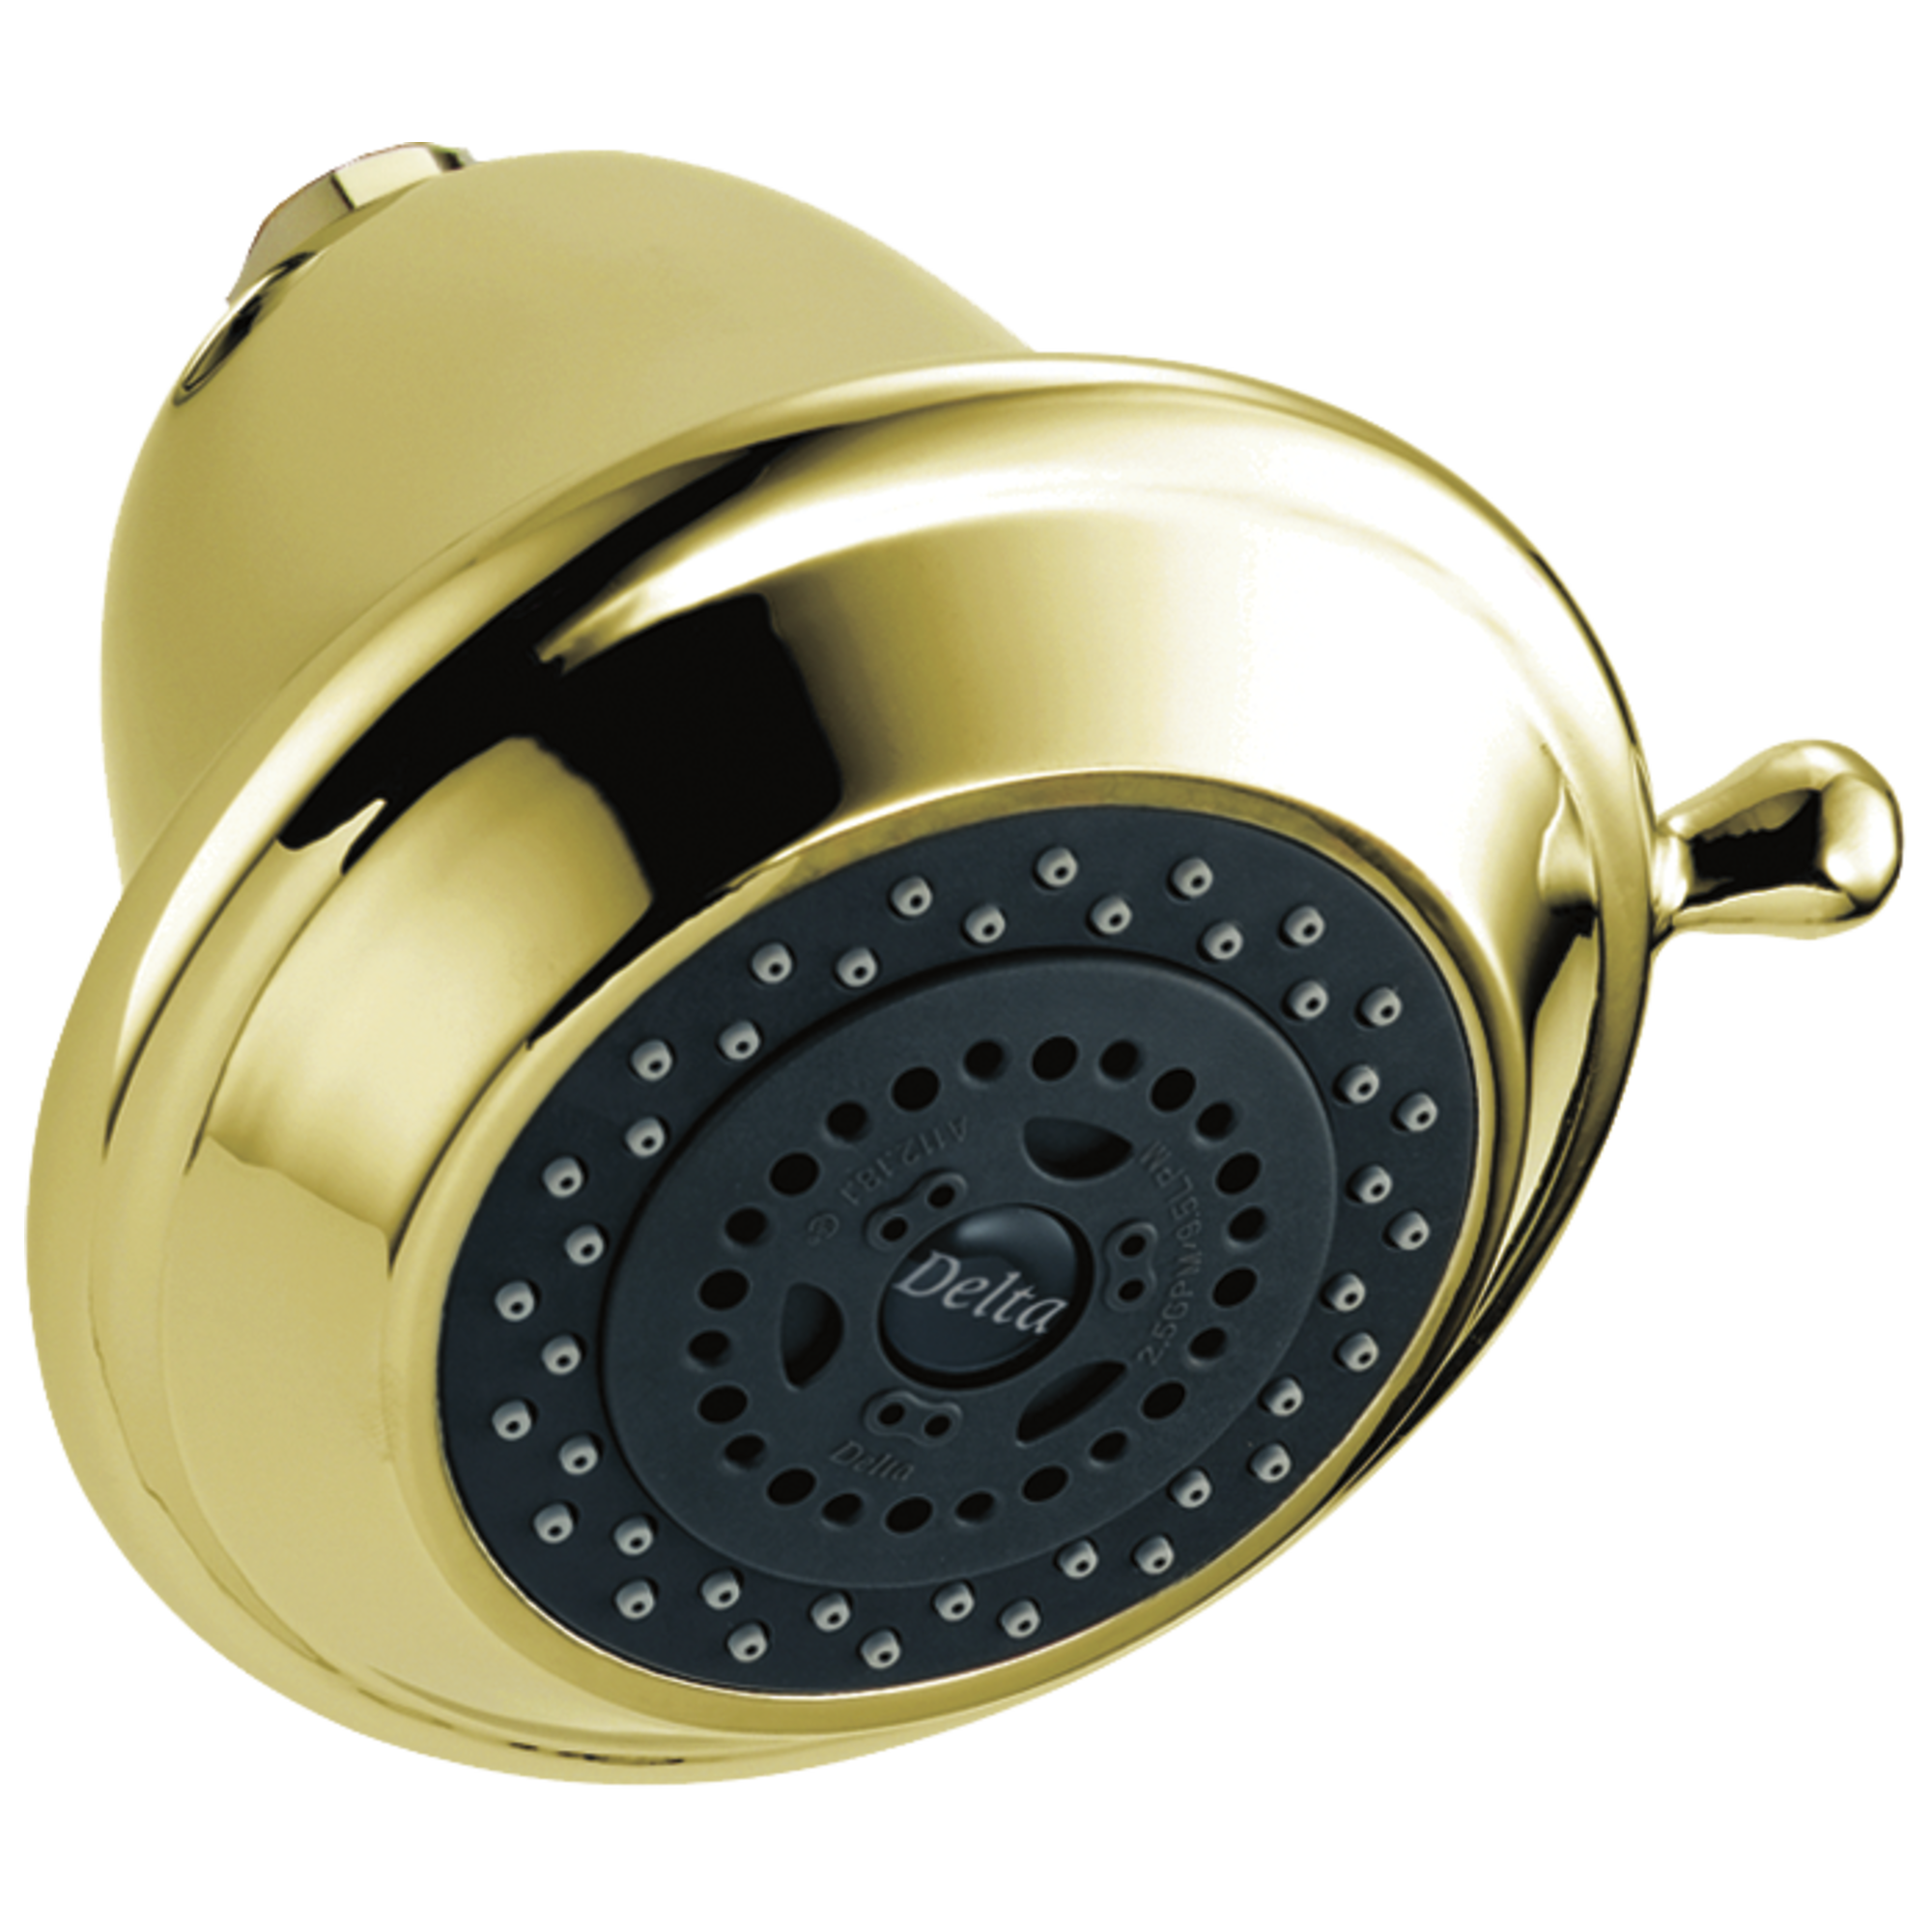 Delta Universal Showering Components Polished Brass Fixed Showerhead 1.75-GPM (6.6-LPM)